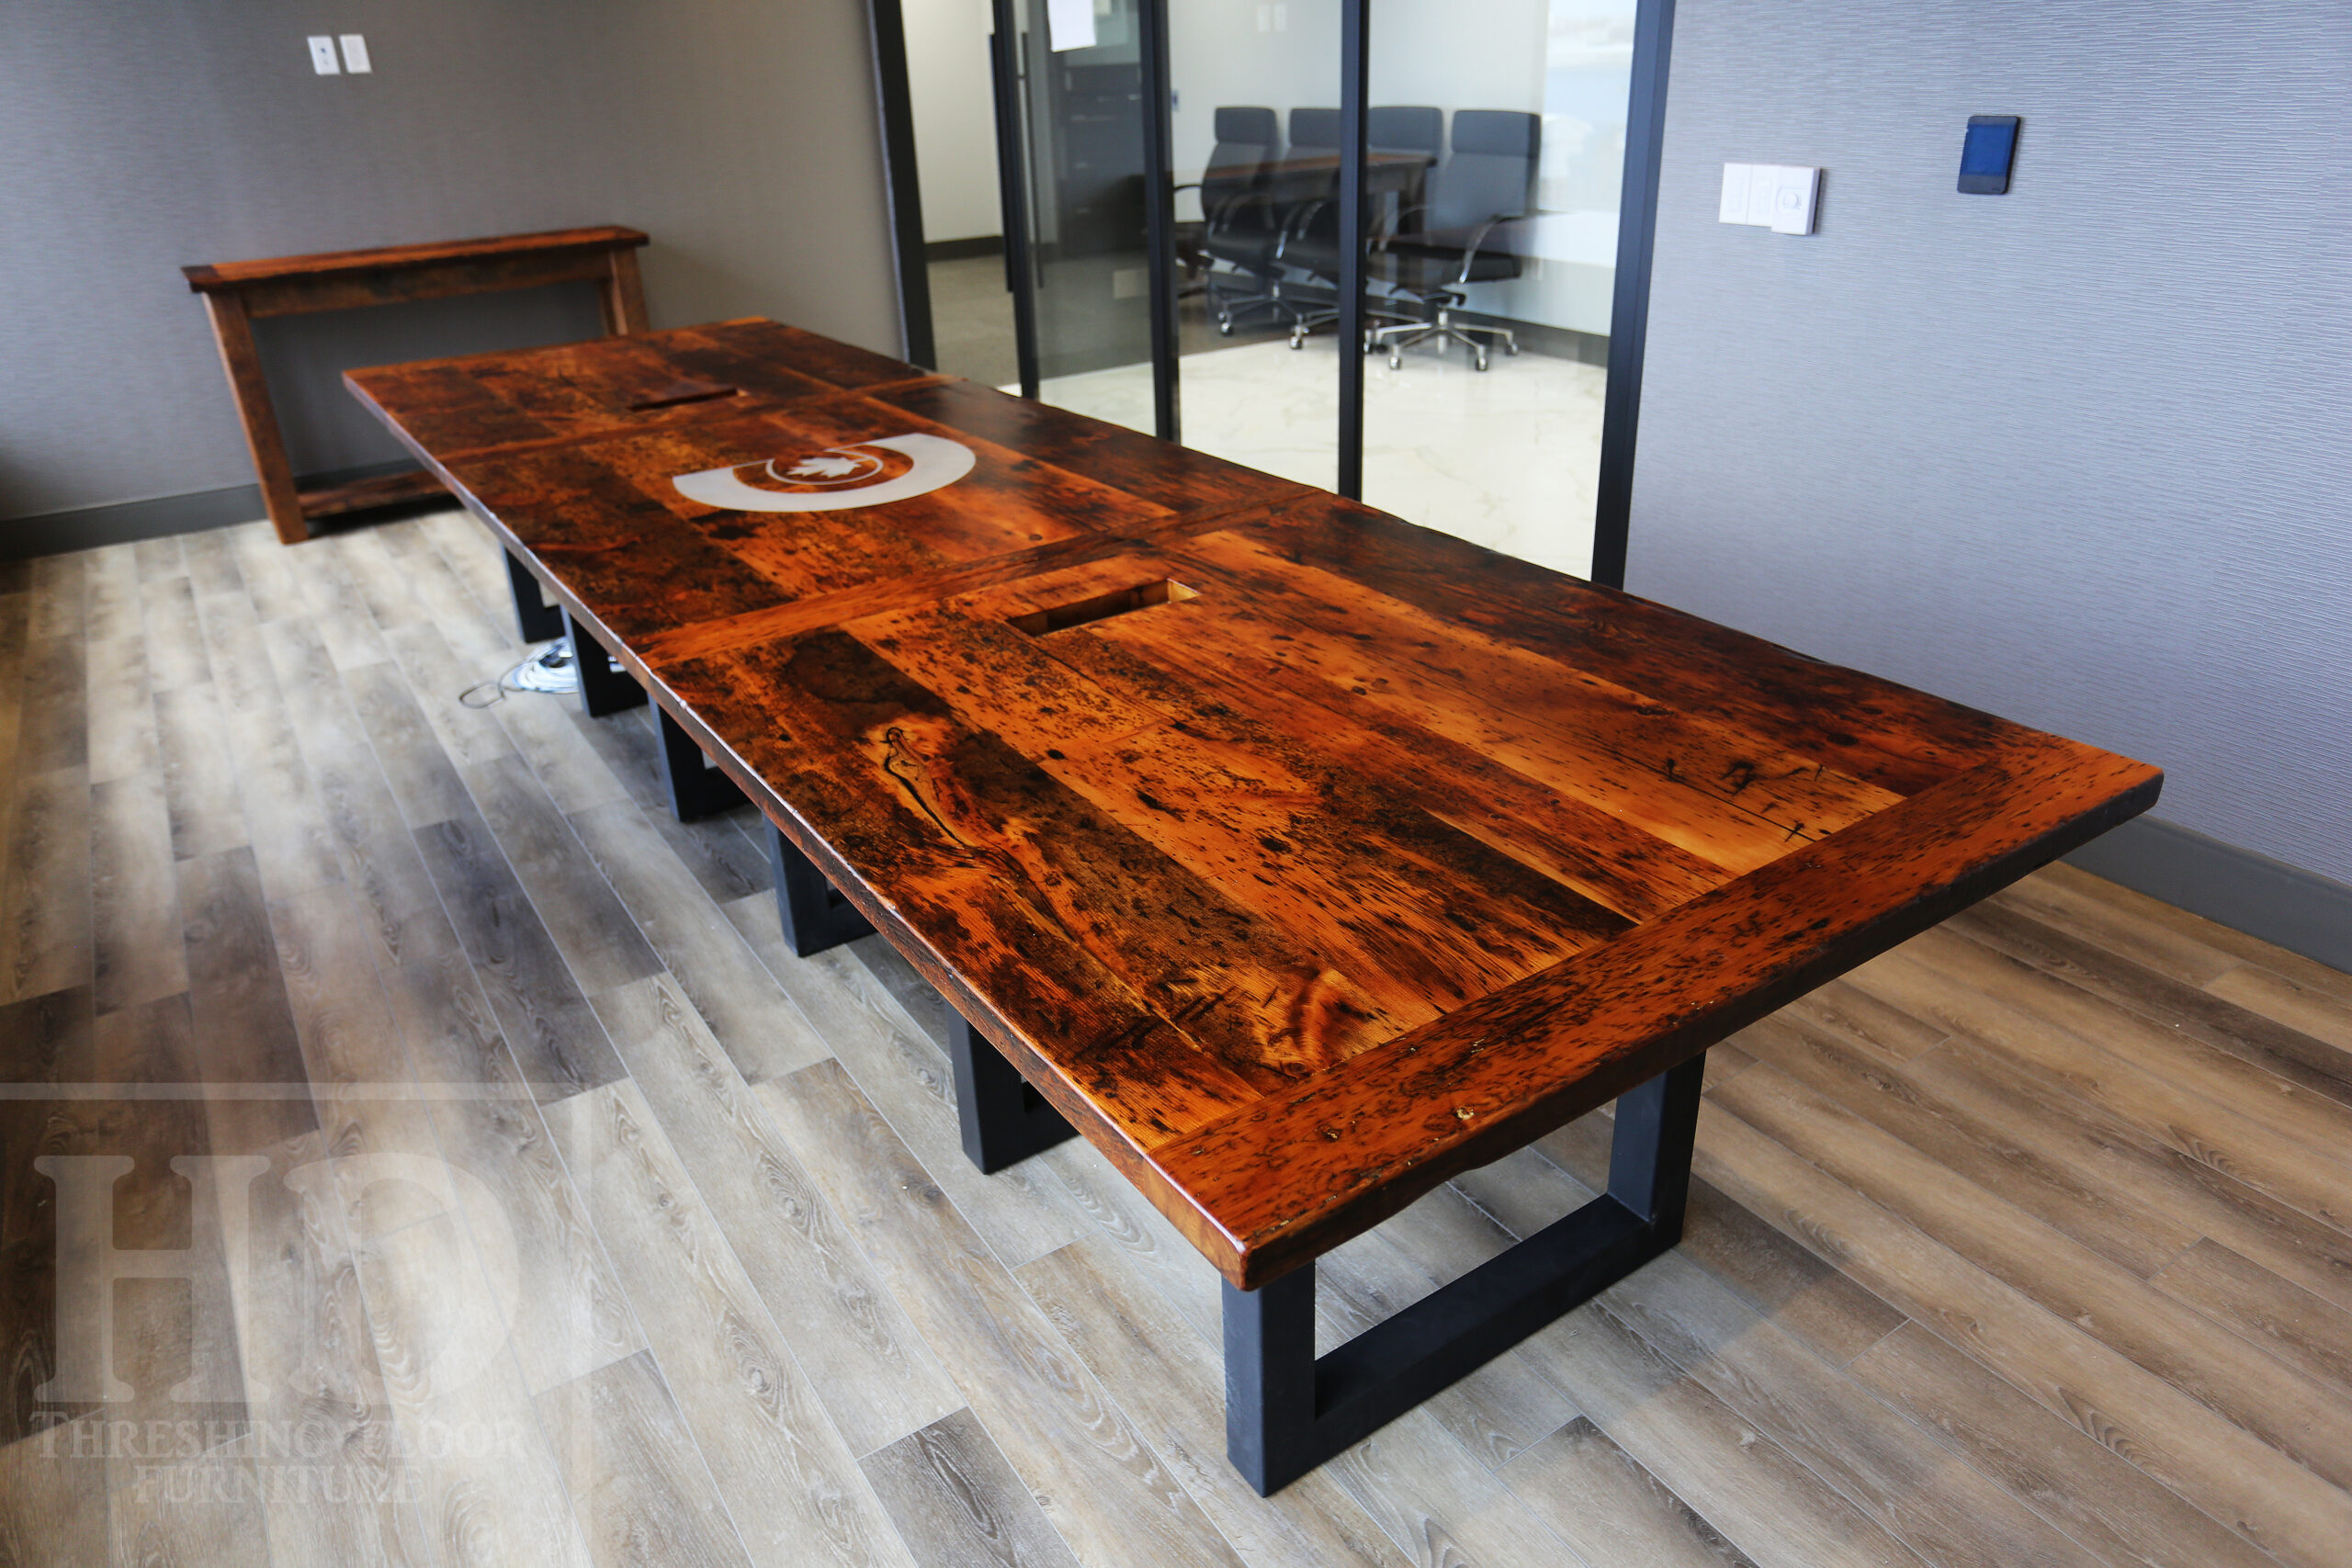 Project details: 14â€™ Reclaimed Ontario Barnwood Boardroom Table we made for a Maple, Ontario office â€“ 48â€ wide â€“  Matte Black U Shaped Base  - Old Growth Pine Threshing Floor Construction - Original edges & distressing maintained â€“ Bread Edge Ends â€“ Premium epoxy + matte polyurethane finish - www.table.ca